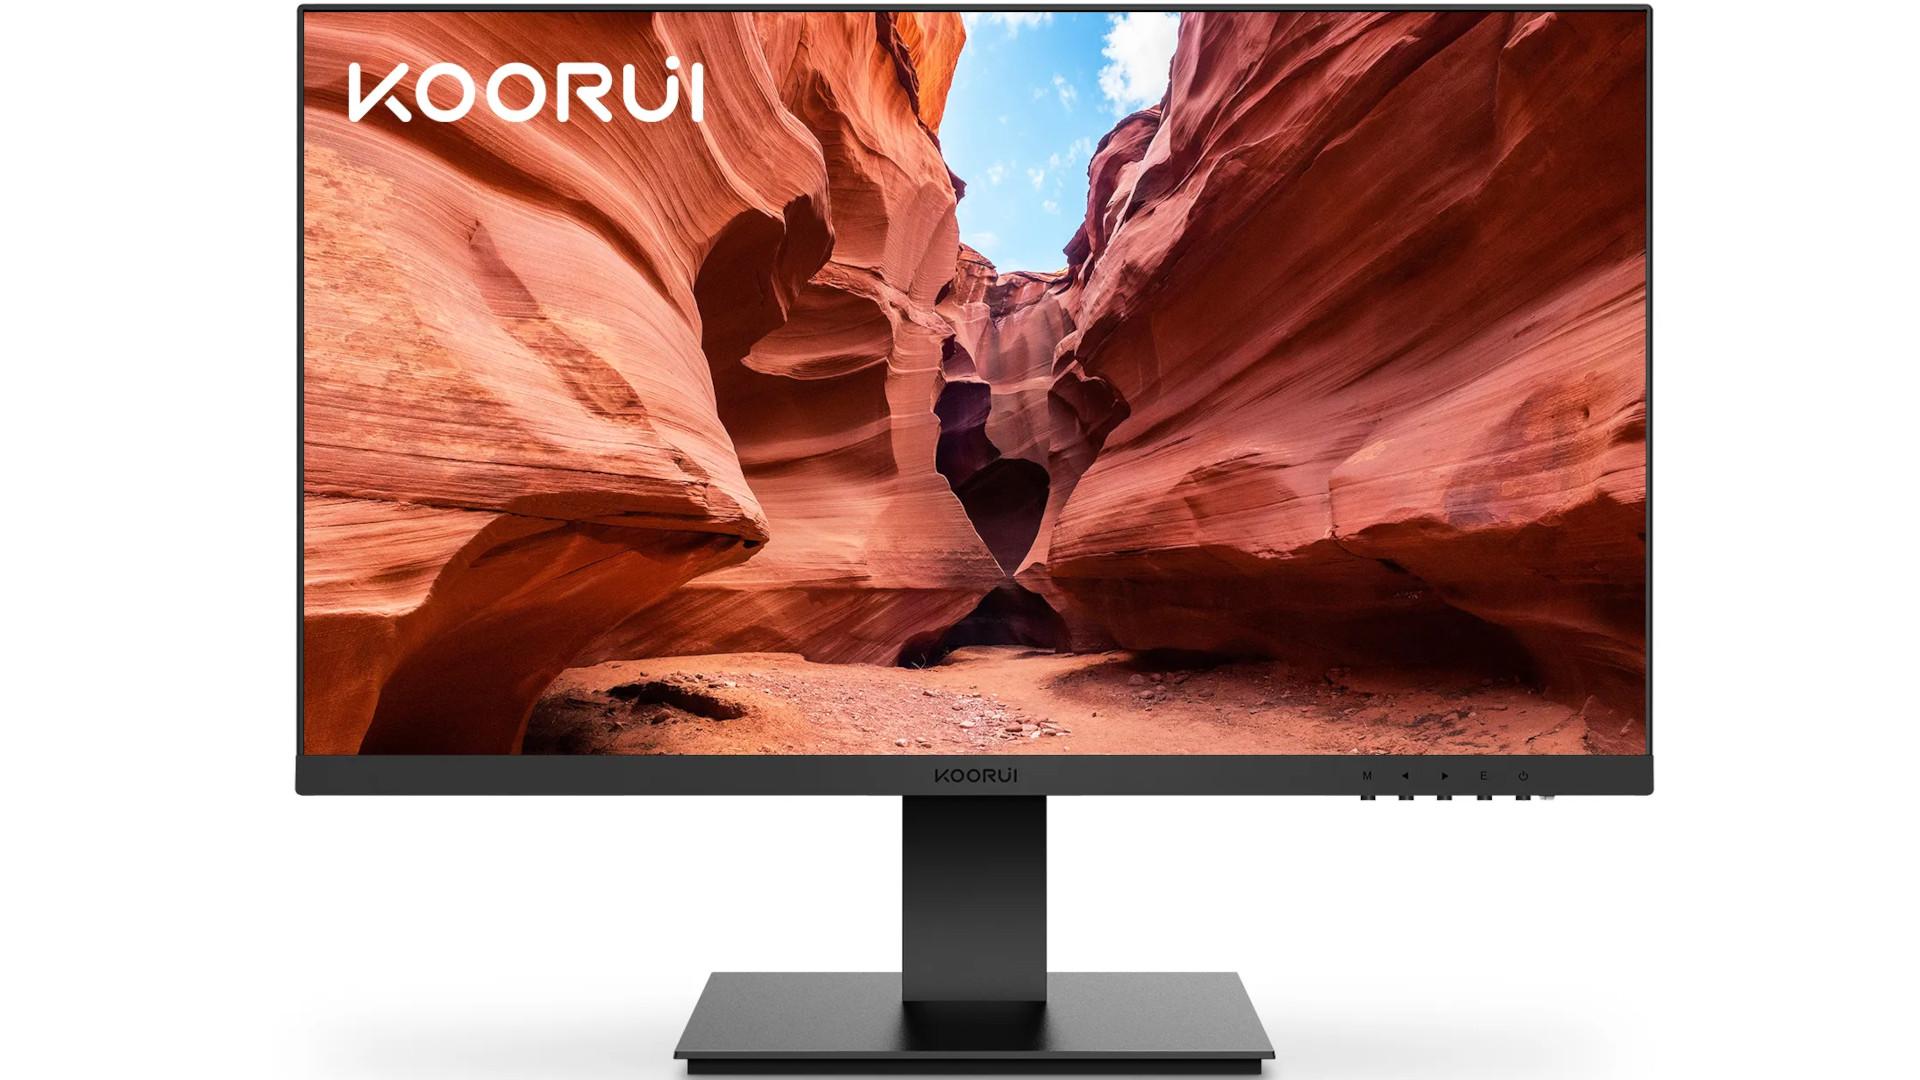 Read more about the article KOORUI 24-Inch 24N1A VA FHD Monitor Review